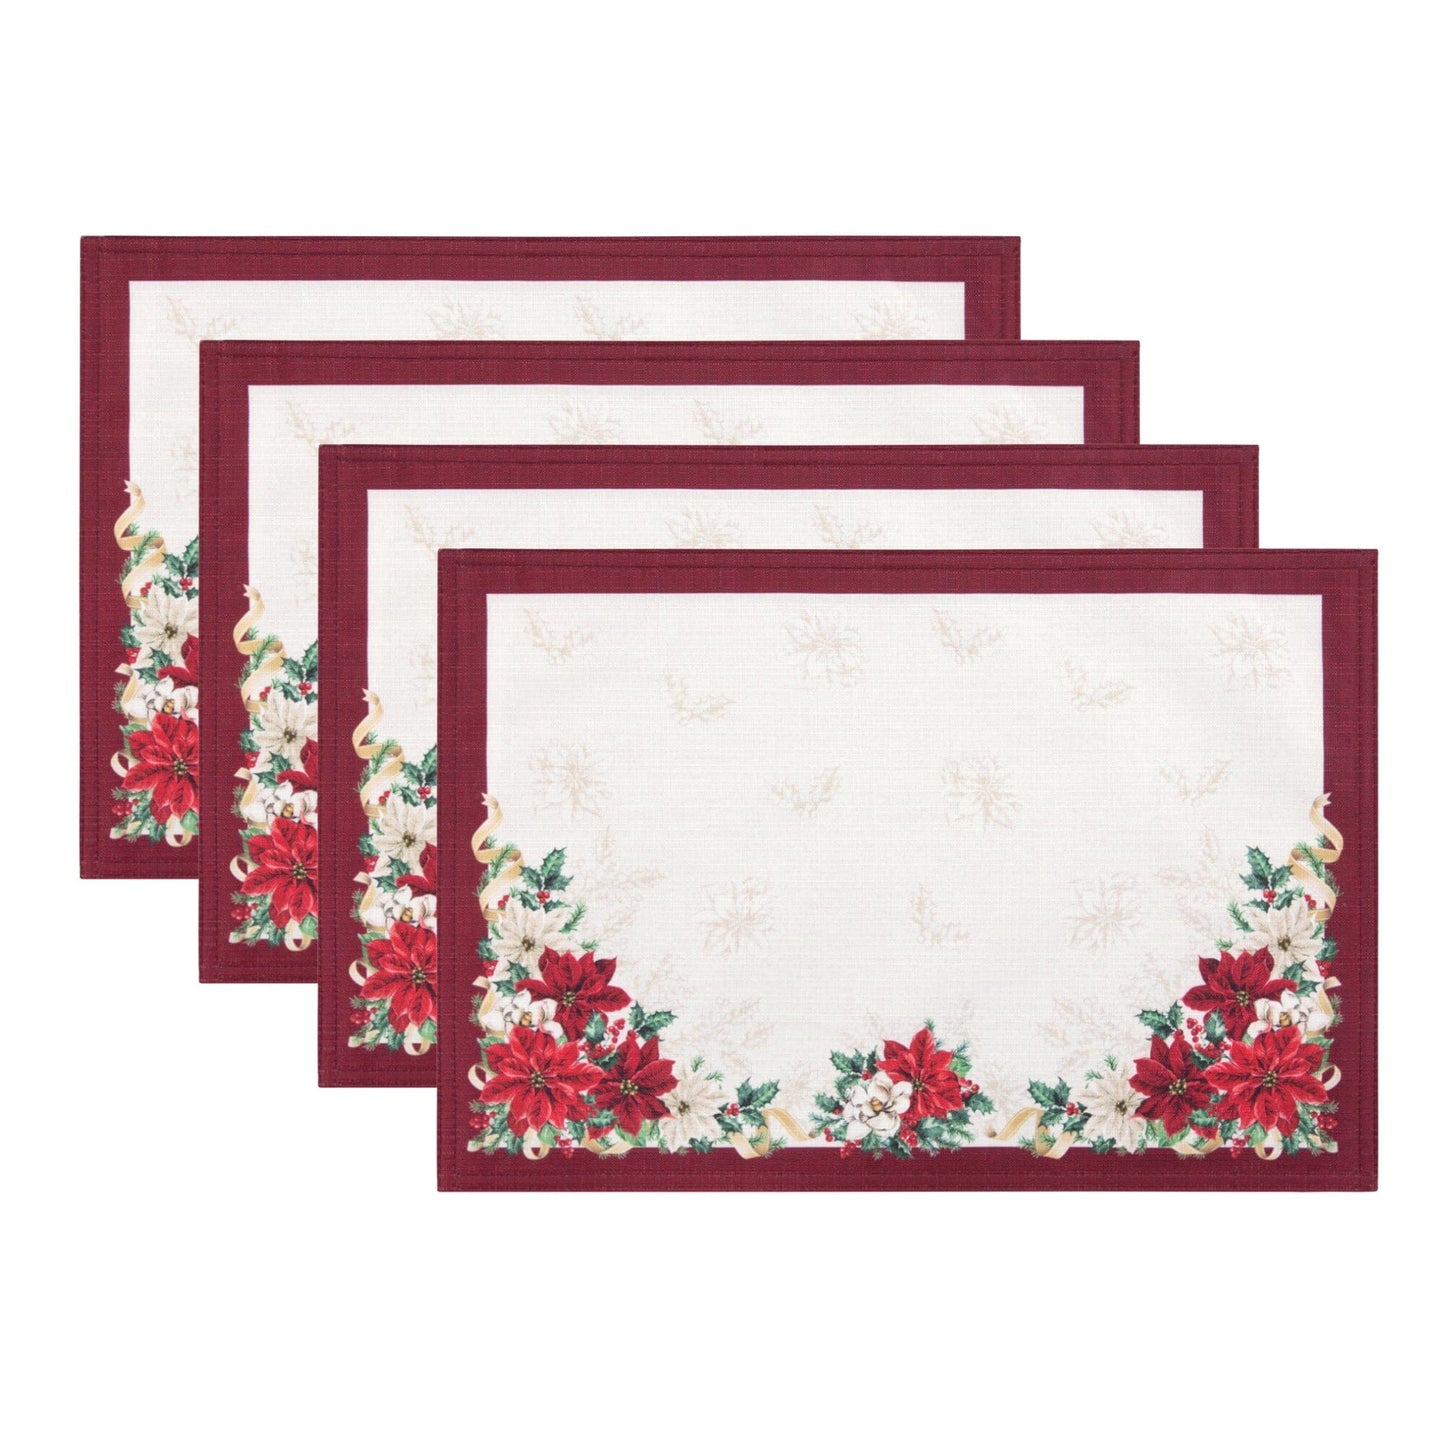 Poinsettia Garlands Engineered Placemats, Set of 4